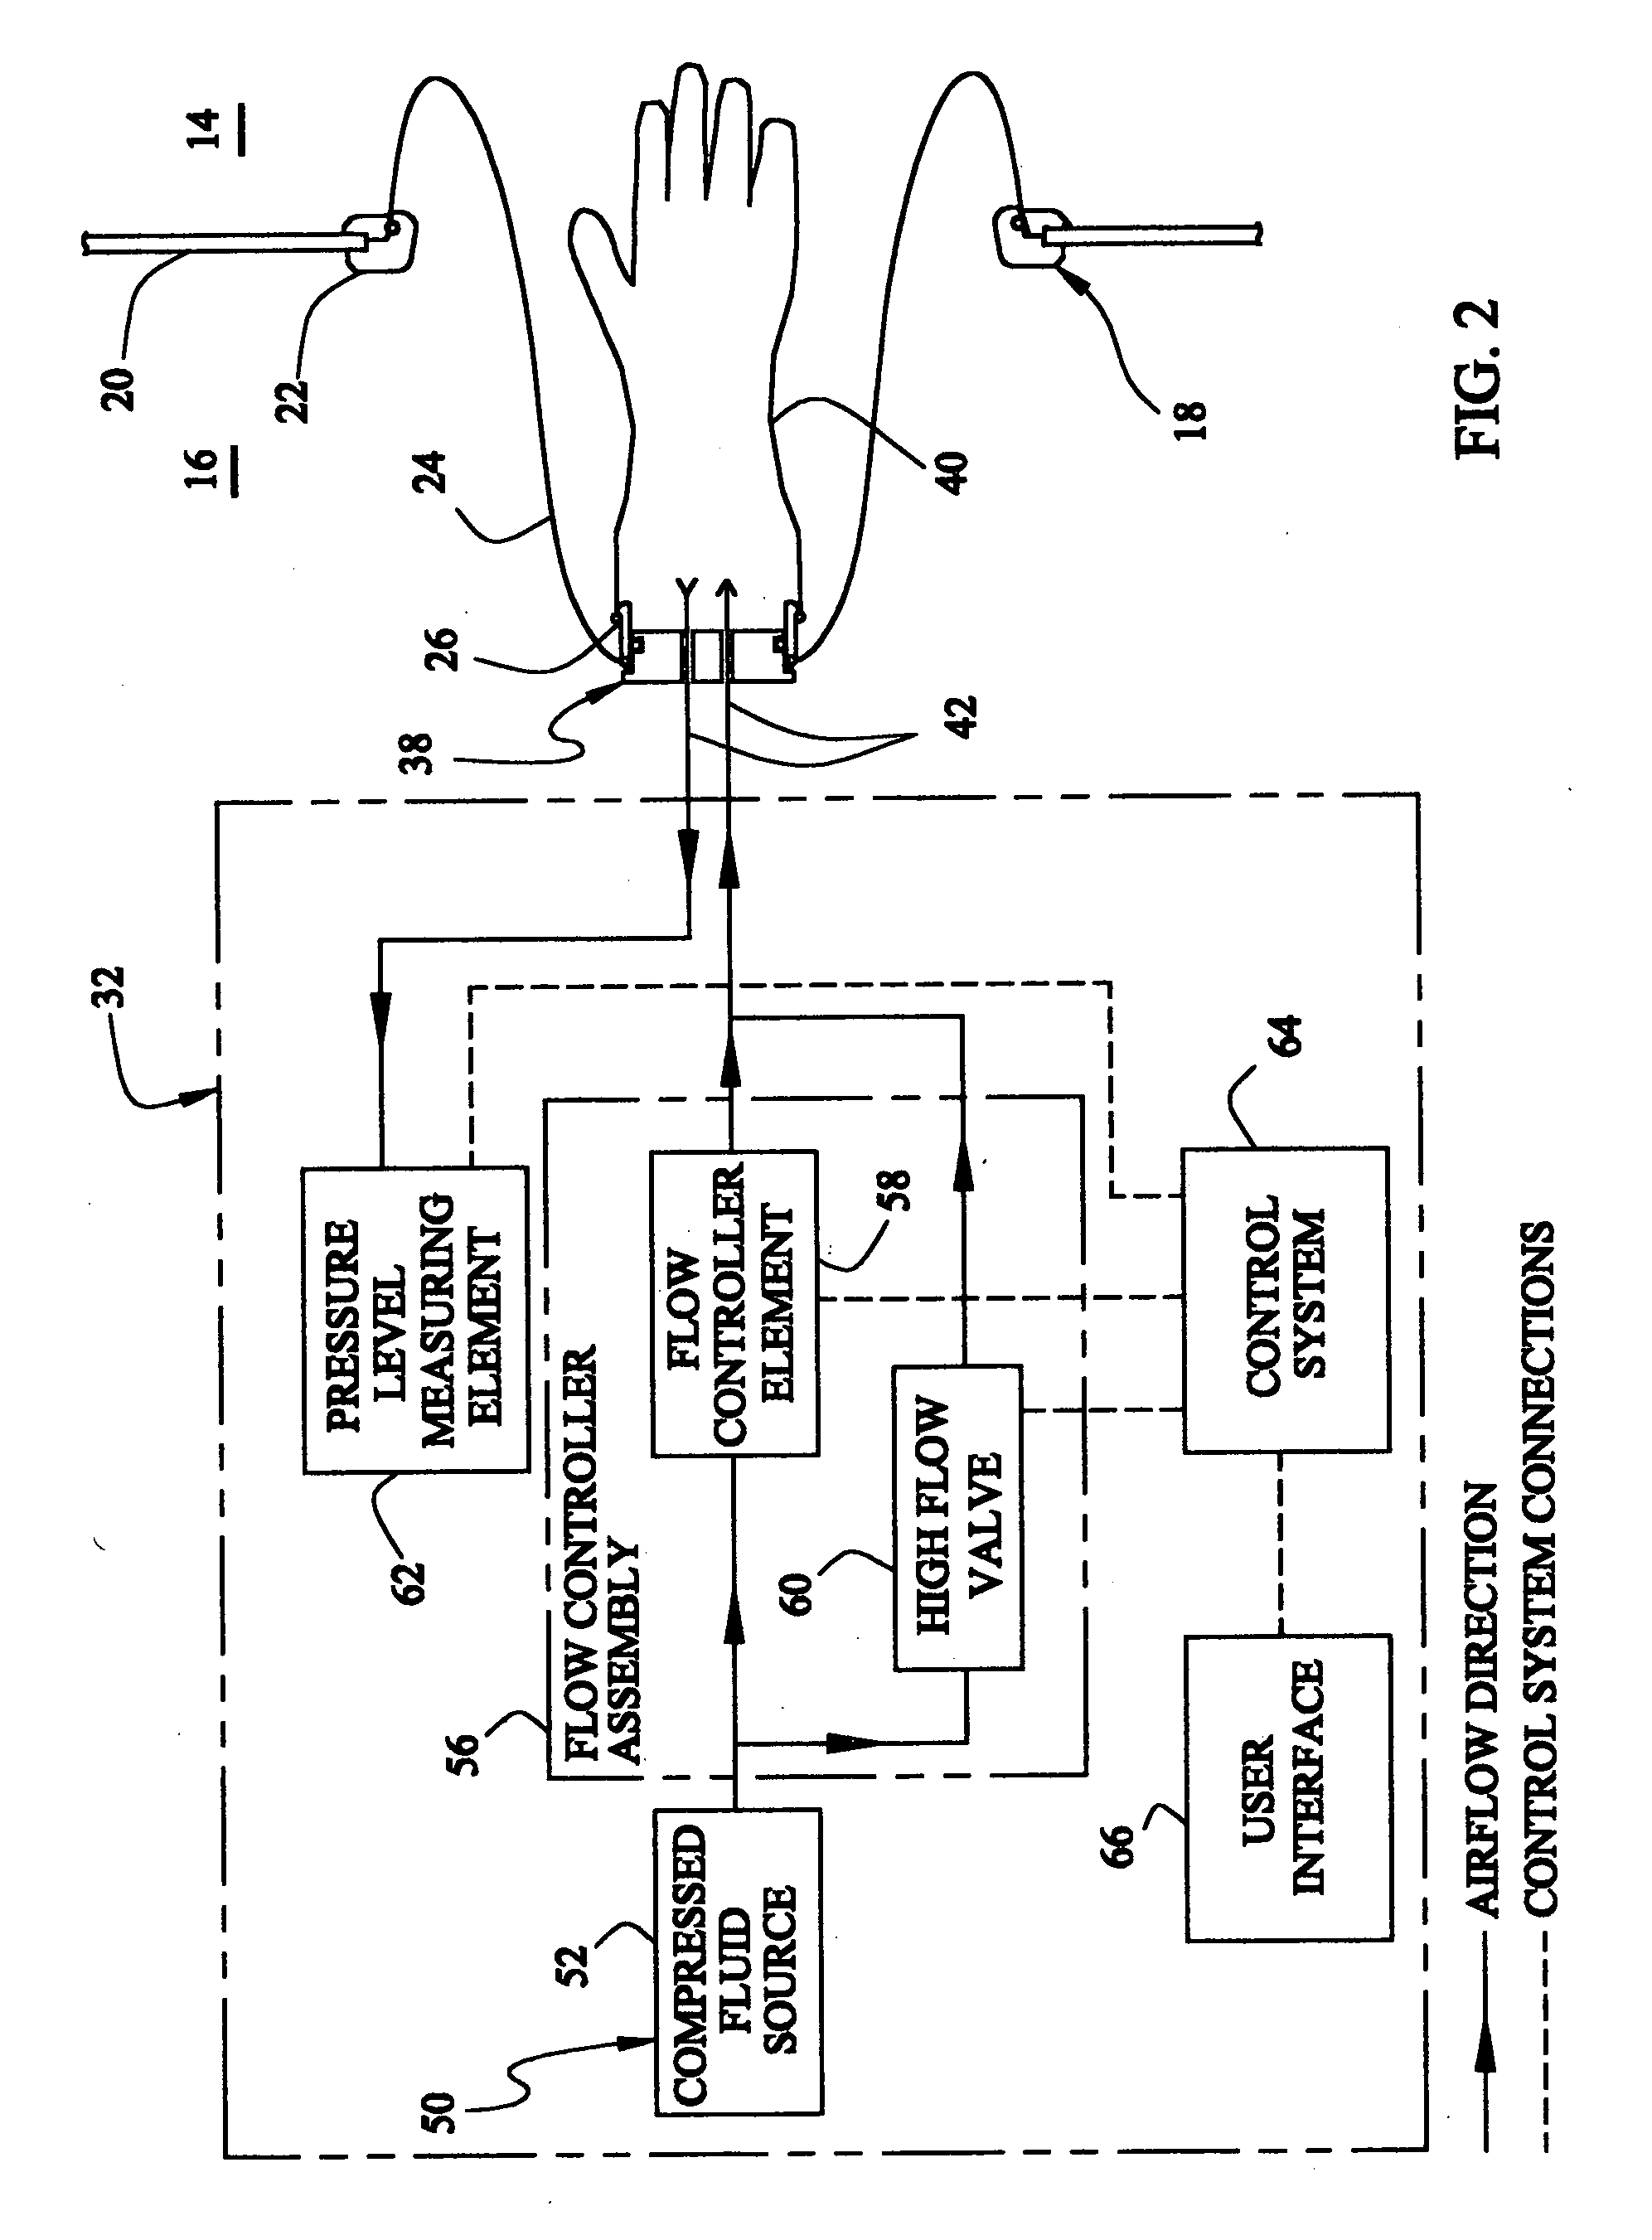 System and method for leak detection